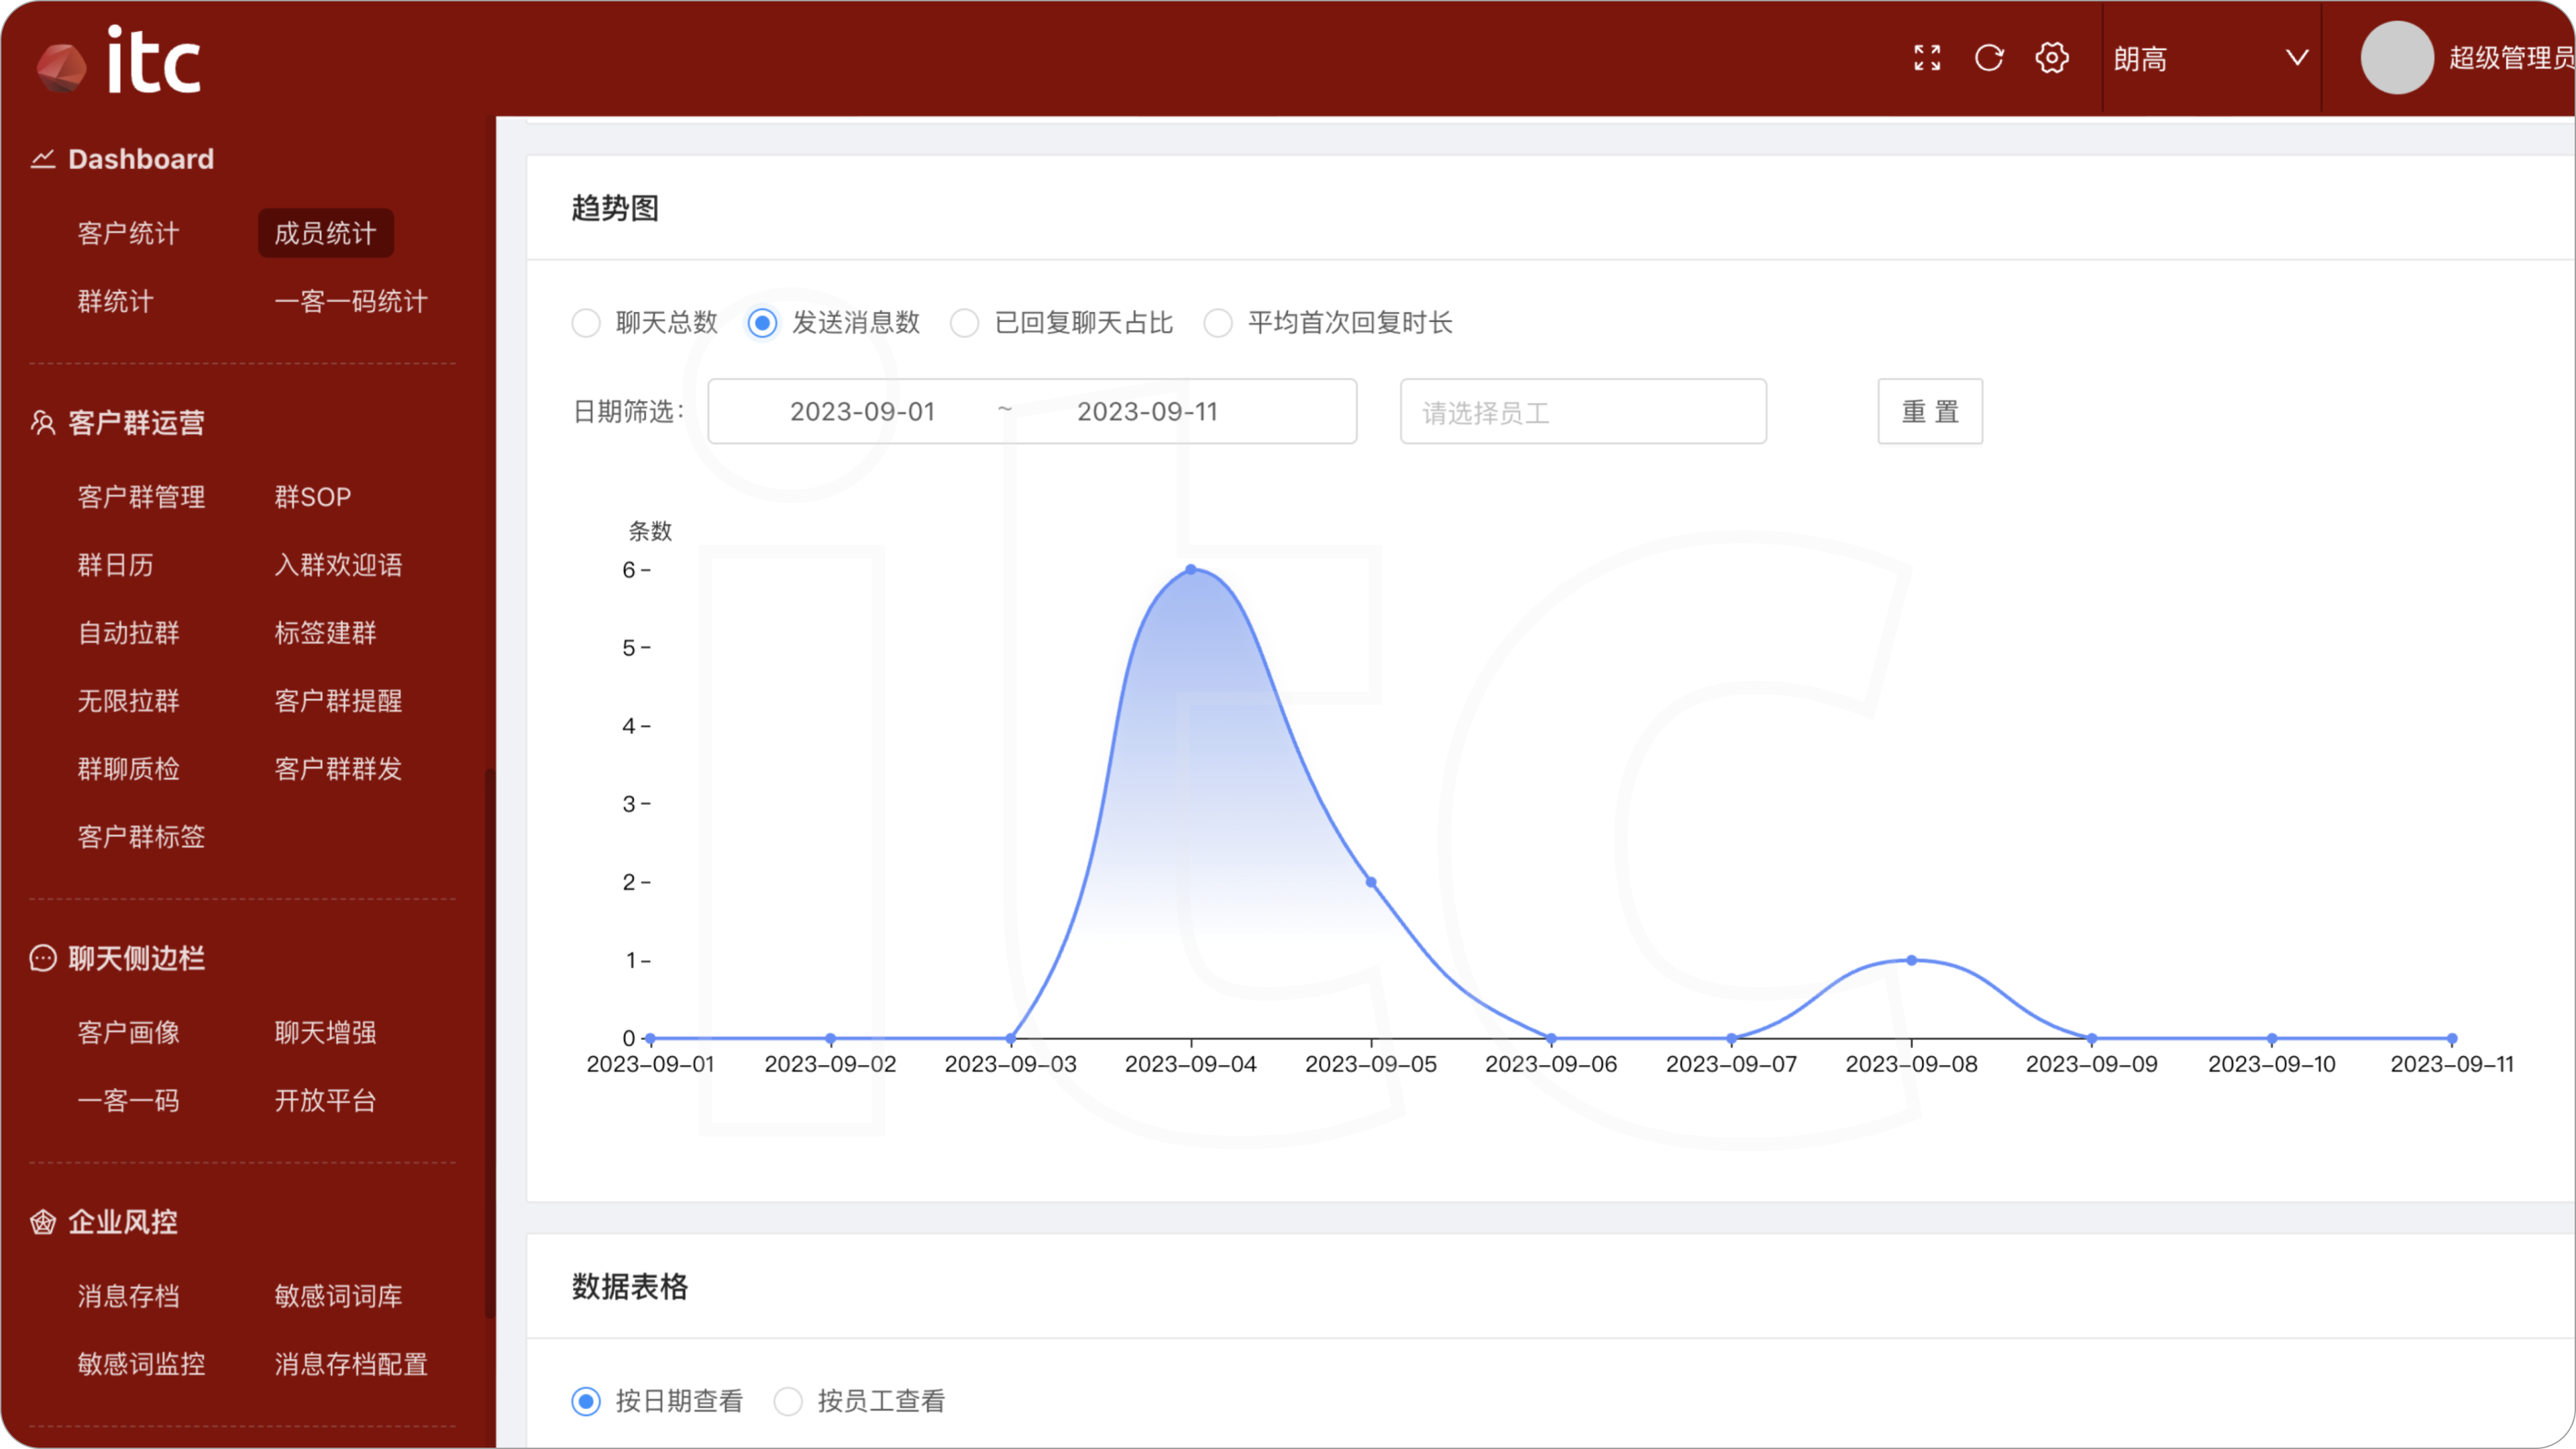 Customer data report on ITC Clienteling Solution with more data and insights to support WeCom (WeChat Work)